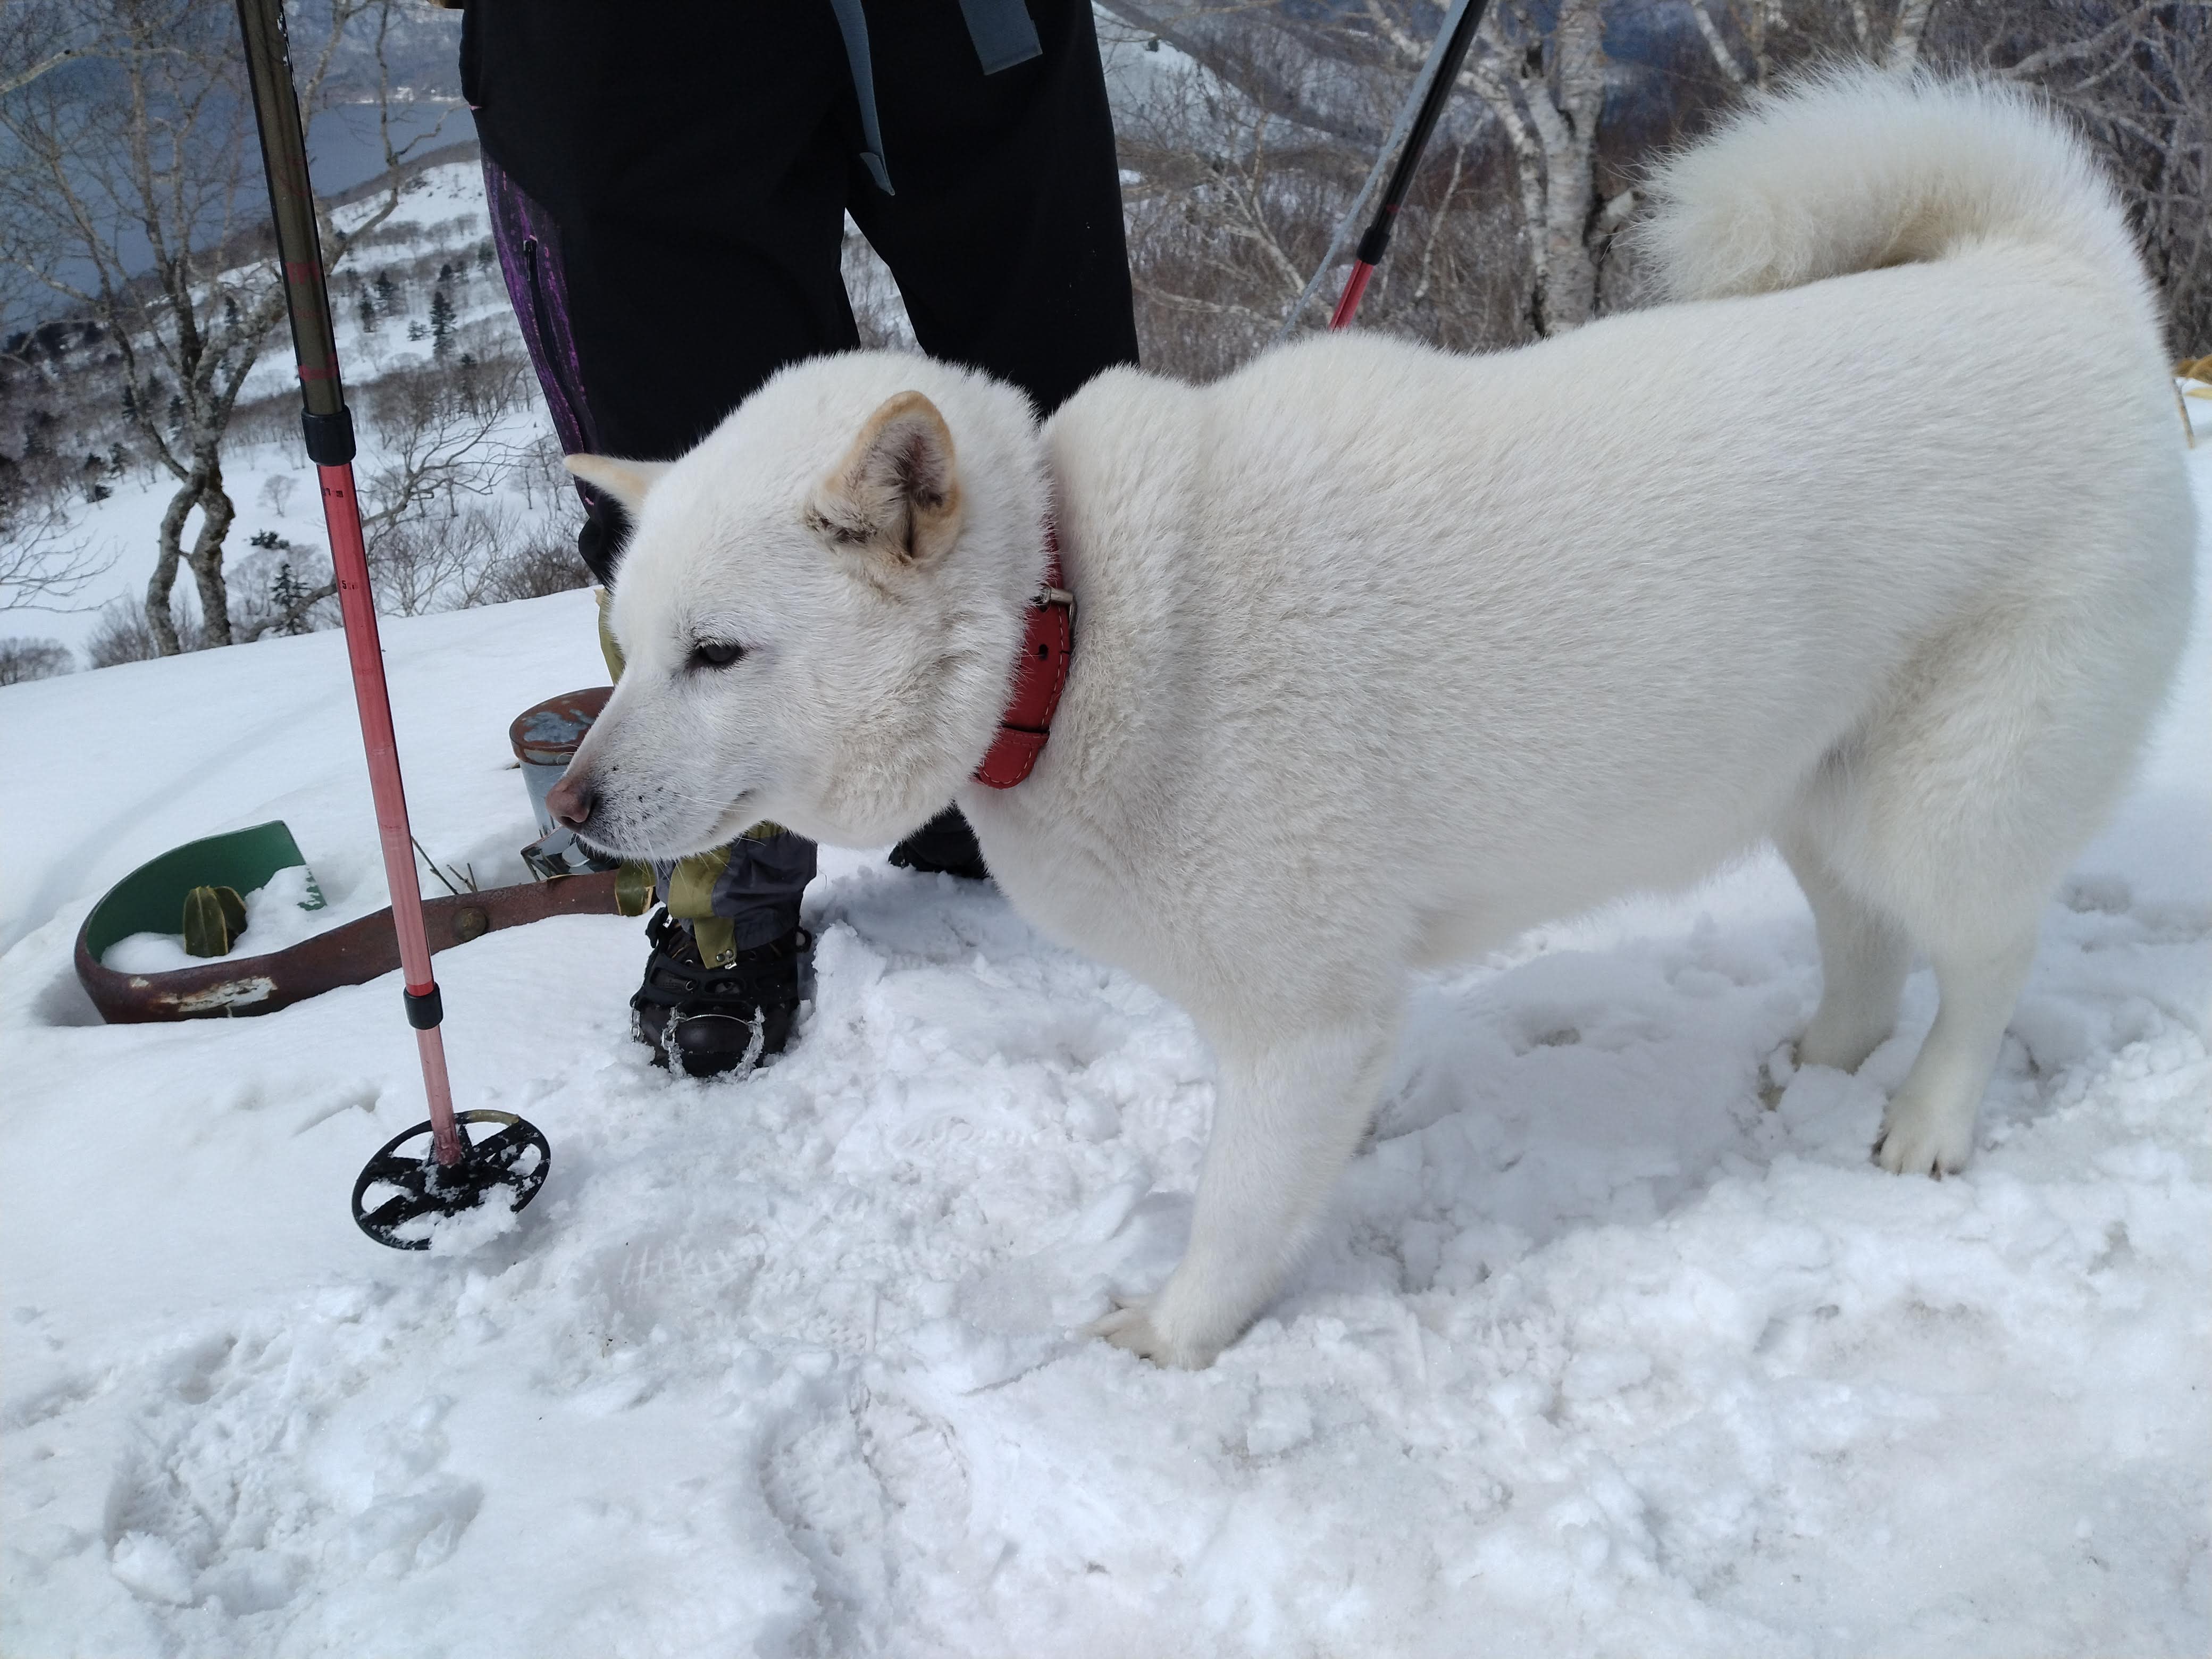 A snow-white dog accompanies its master on a snowshoeing excursion.